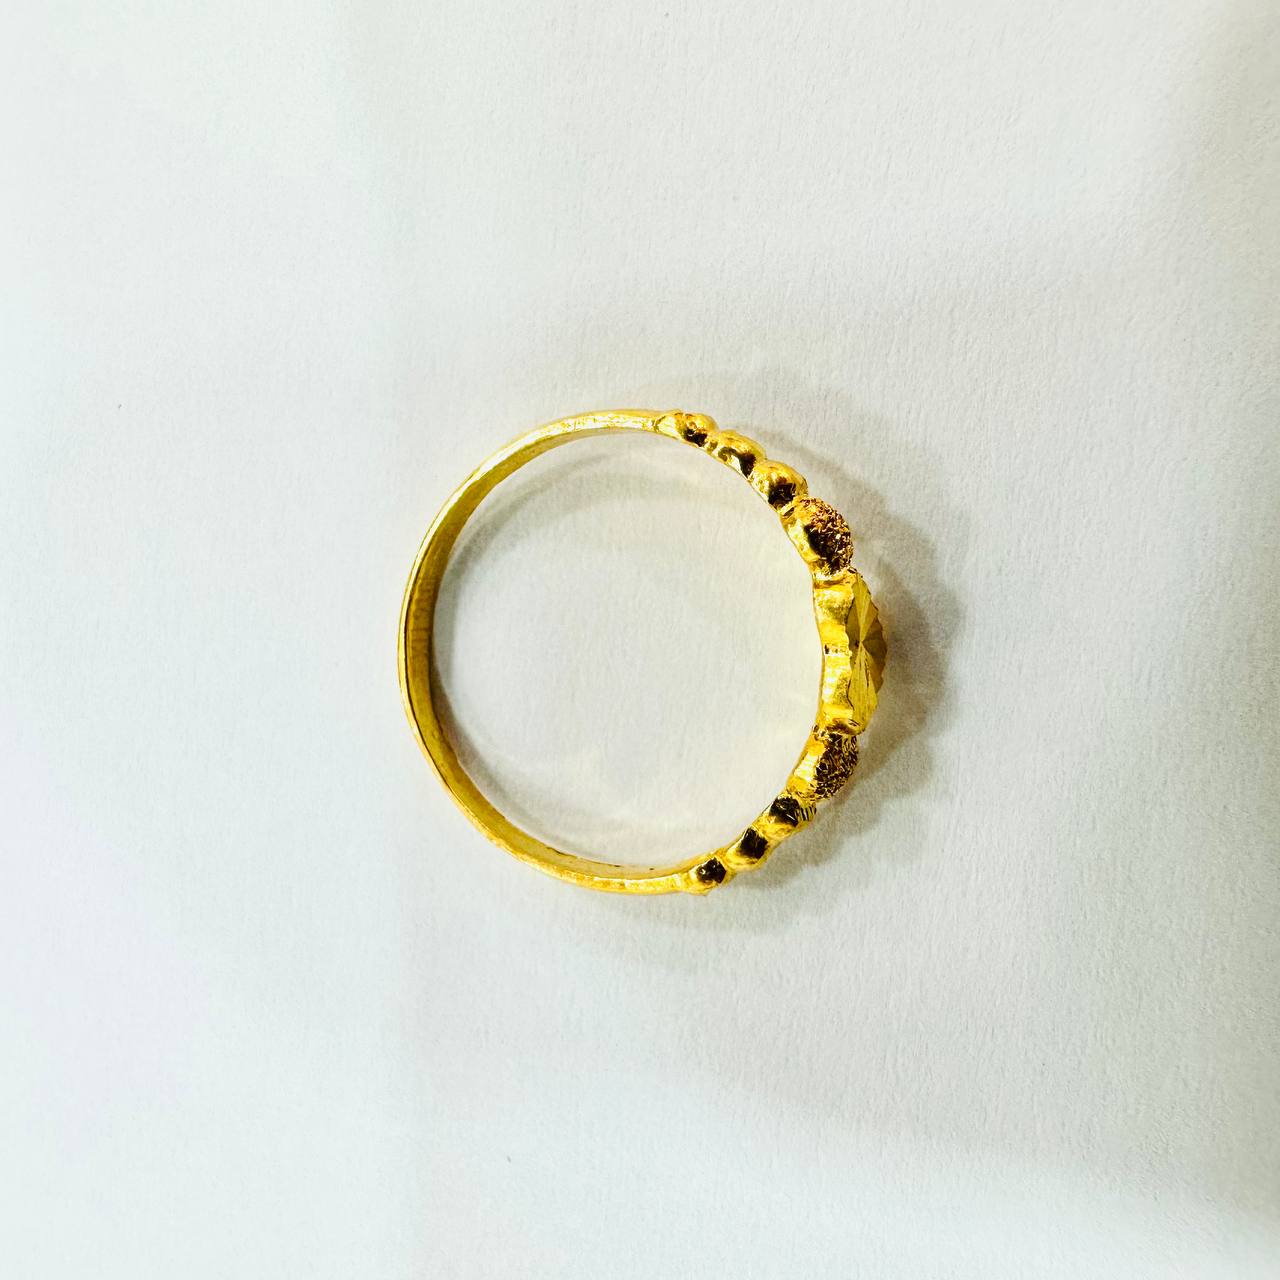 22k / 916 Gold Pinky or kids Ring-916 gold-Best Gold Shop